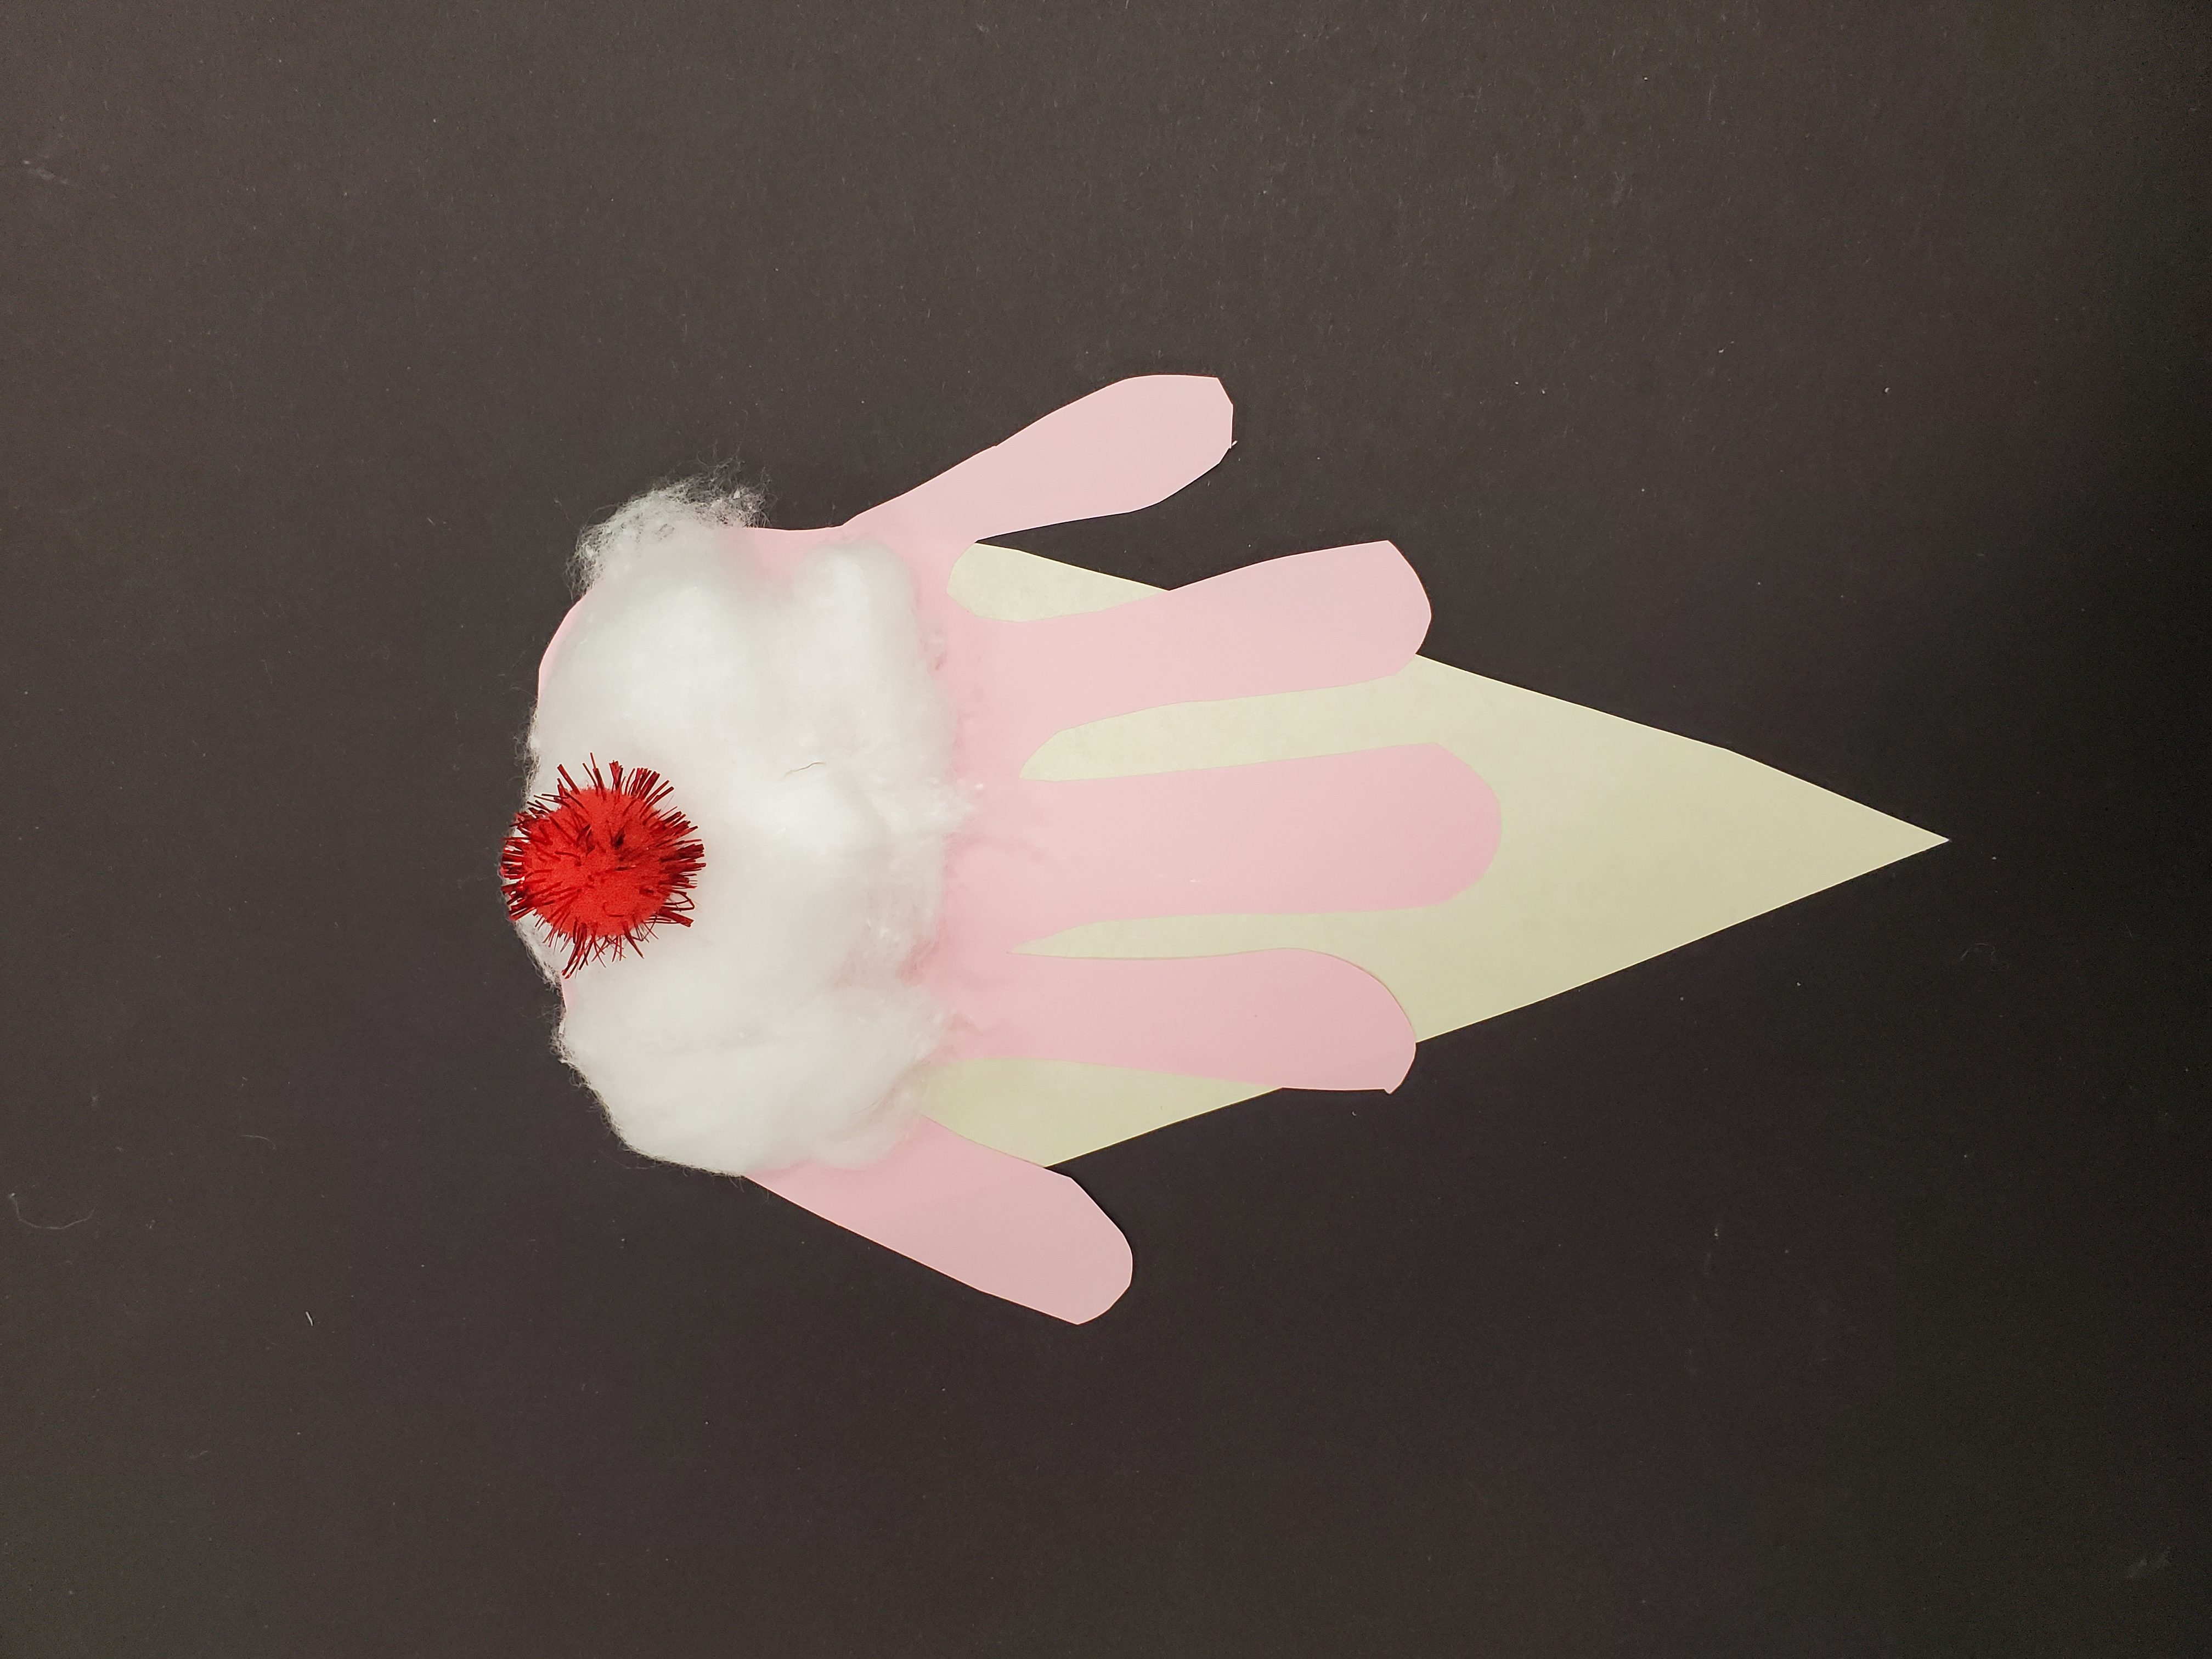 Image of a colorful children's craft made to look like an ice cream cone with whipped cream and a cherry on top. The ice cream portion is made of a pink paper cutout of a child-size handprint.